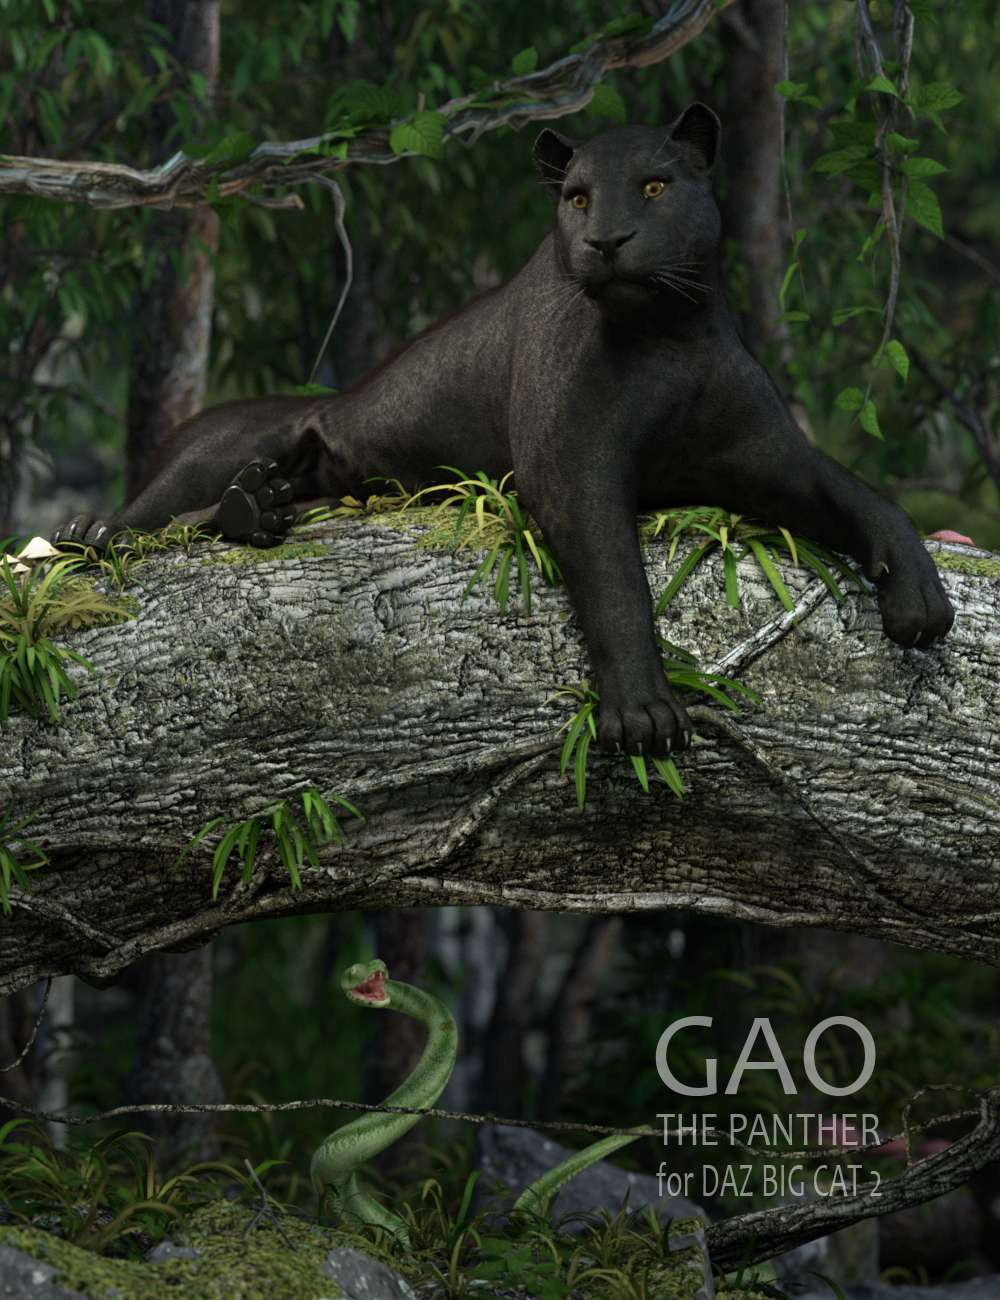 Gao The Panther for DAZ BIG CAT 2 by: Deepsea, 3D Models by Daz 3D